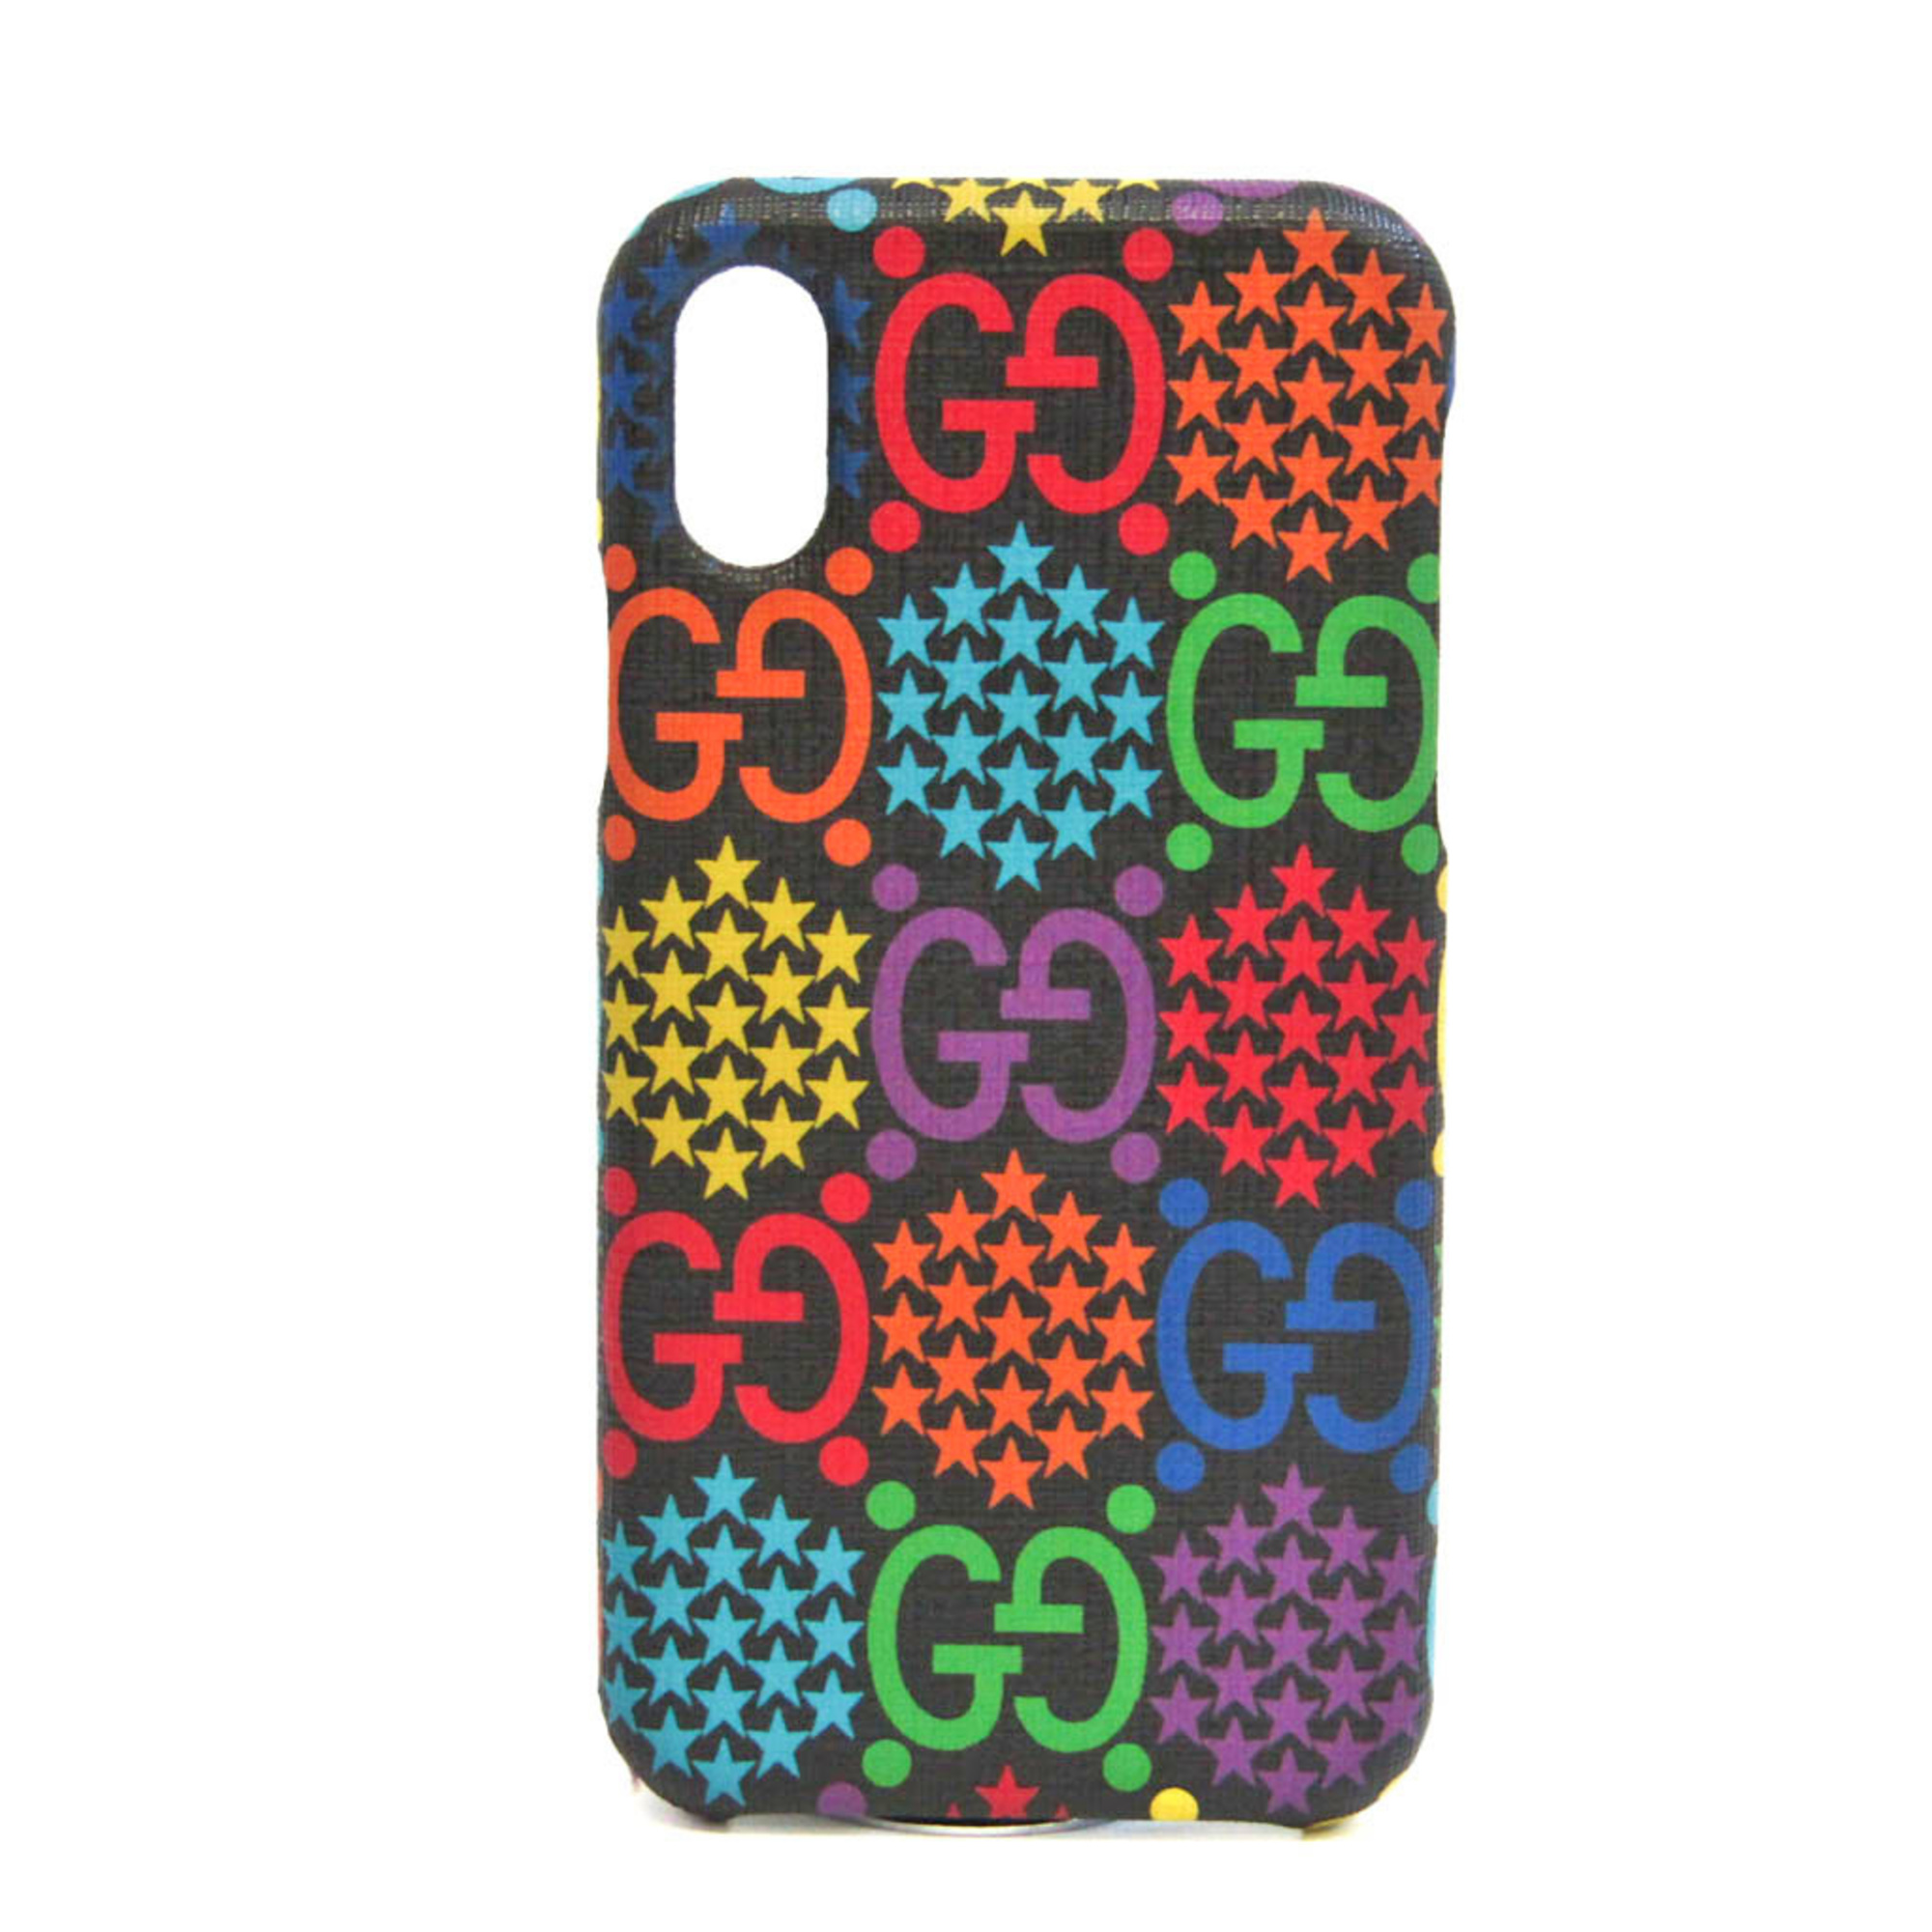 Gucci PVC Phone Bumper For IPhone X Black,Multi-color GG Psychedelic 603758